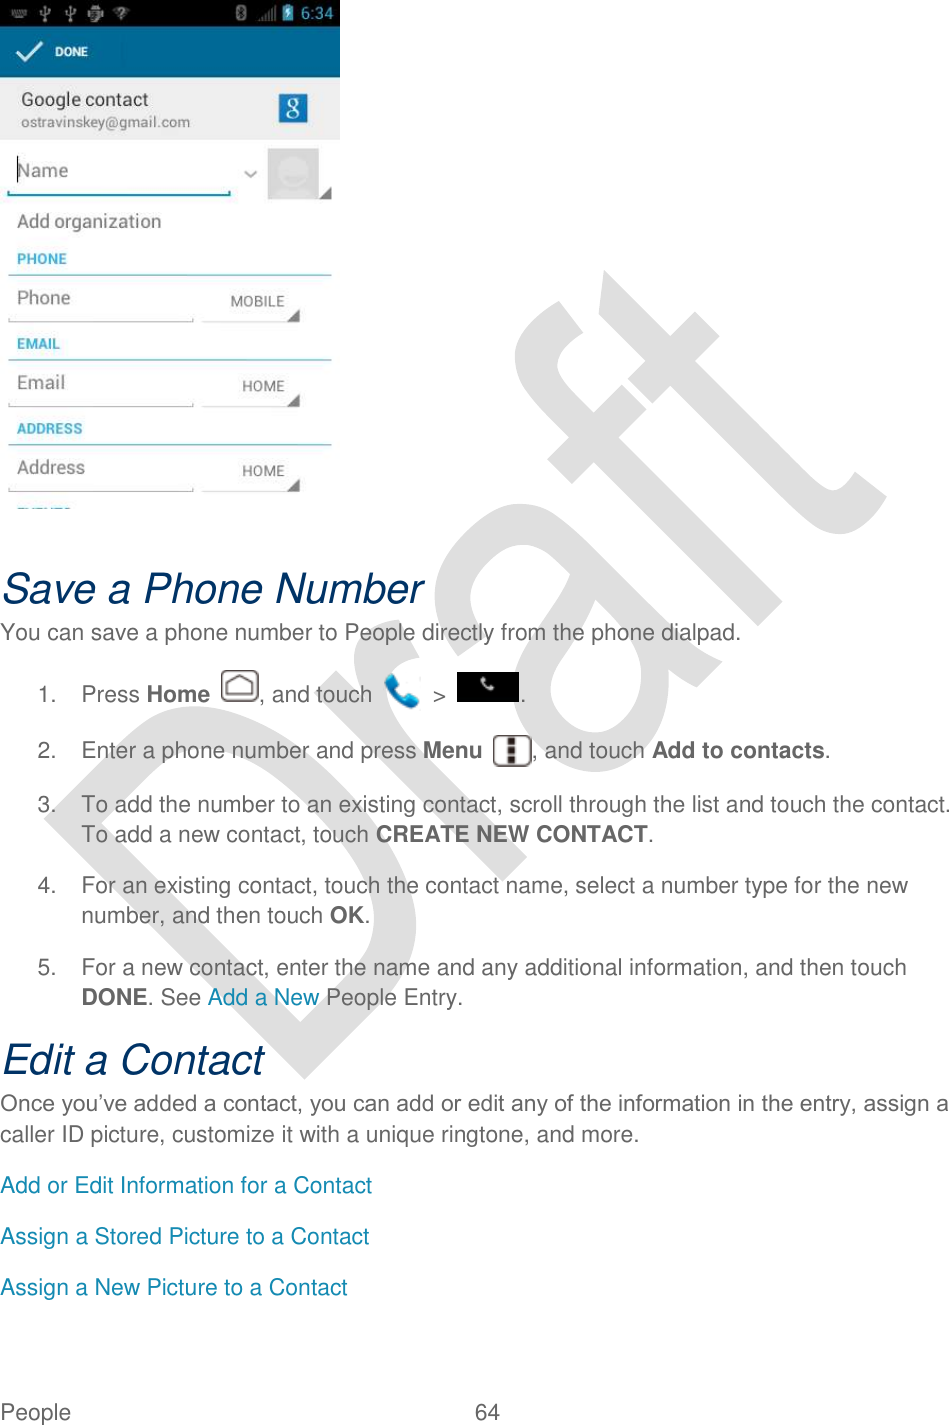  People  64     Save a Phone Number You can save a phone number to People directly from the phone dialpad. 1.  Press Home  , and touch    &gt;  . 2.  Enter a phone number and press Menu  , and touch Add to contacts. 3.  To add the number to an existing contact, scroll through the list and touch the contact. To add a new contact, touch CREATE NEW CONTACT. 4.  For an existing contact, touch the contact name, select a number type for the new number, and then touch OK. 5.  For a new contact, enter the name and any additional information, and then touch DONE. See Add a New People Entry. Edit a Contact Once you‟ve added a contact, you can add or edit any of the information in the entry, assign a caller ID picture, customize it with a unique ringtone, and more. Add or Edit Information for a Contact Assign a Stored Picture to a Contact Assign a New Picture to a Contact 